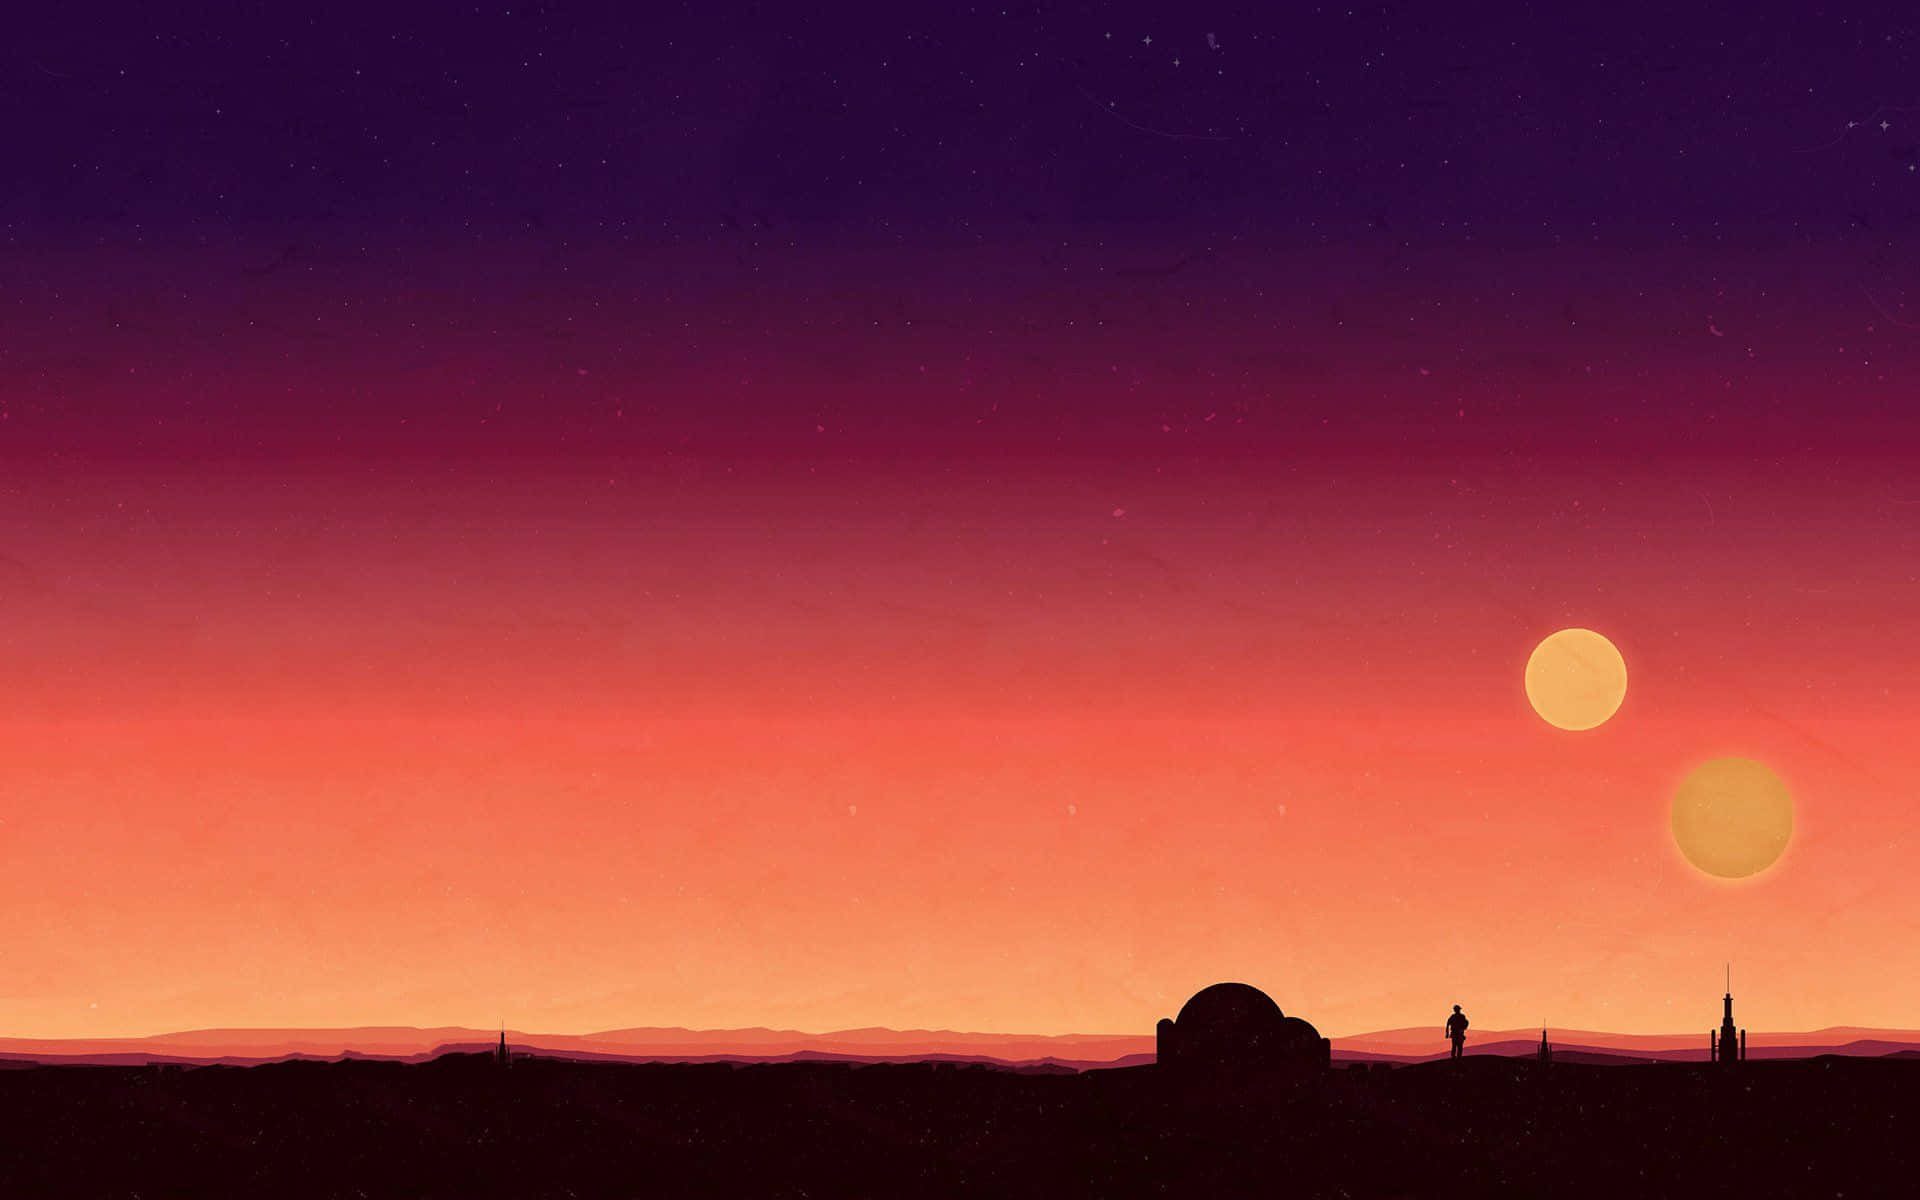 A view of the desert planet of Tatooine with its twin suns in the sky Wallpaper